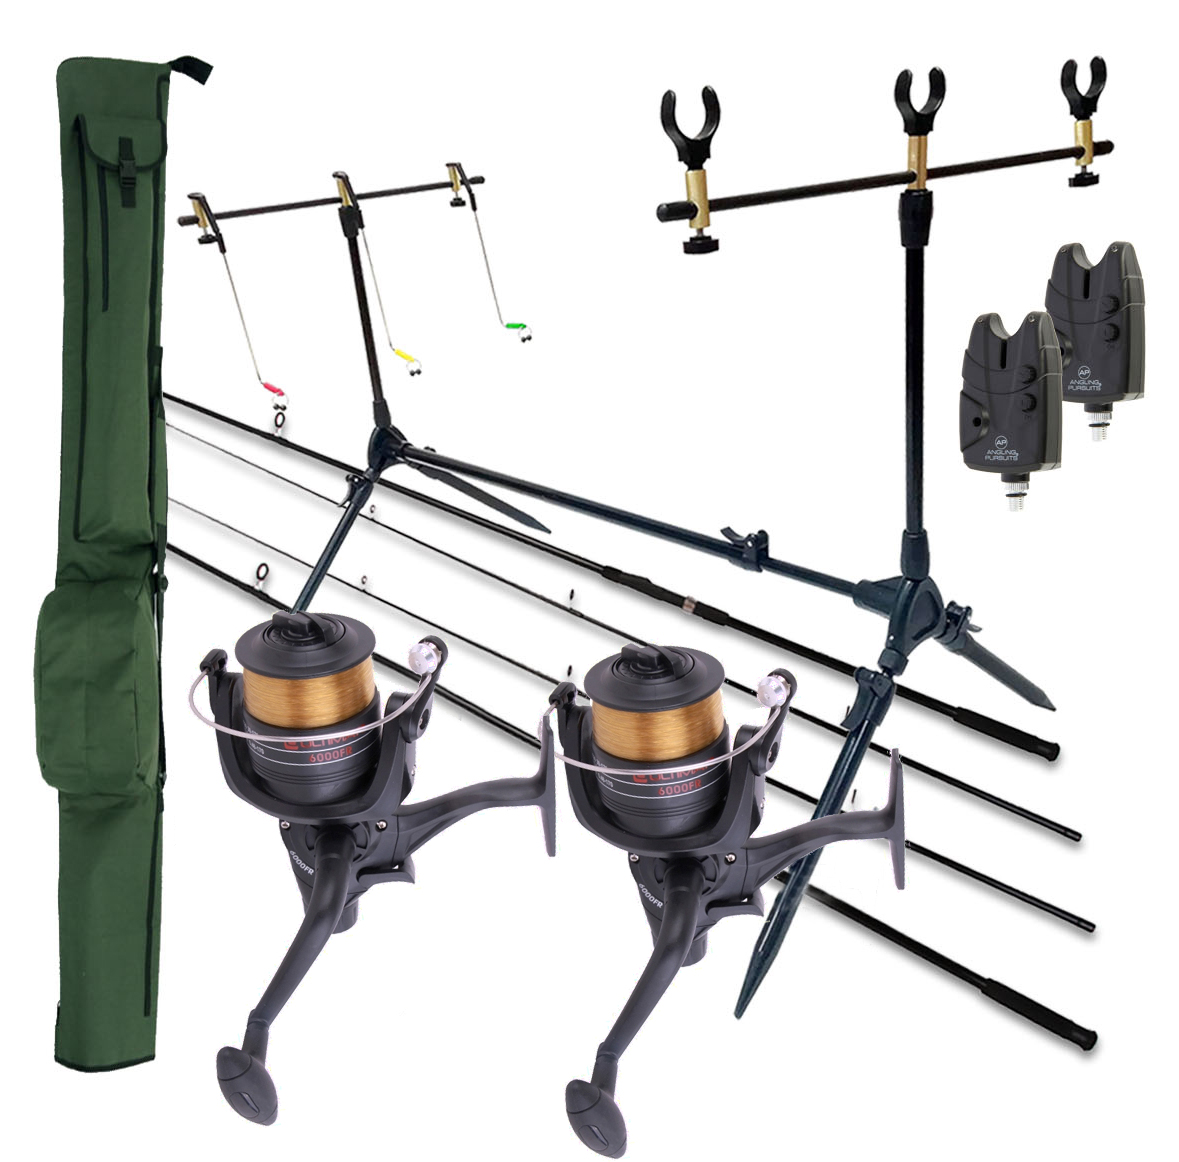 Complete NGT Carp Set with rods, freespool reels, rod pod, bite